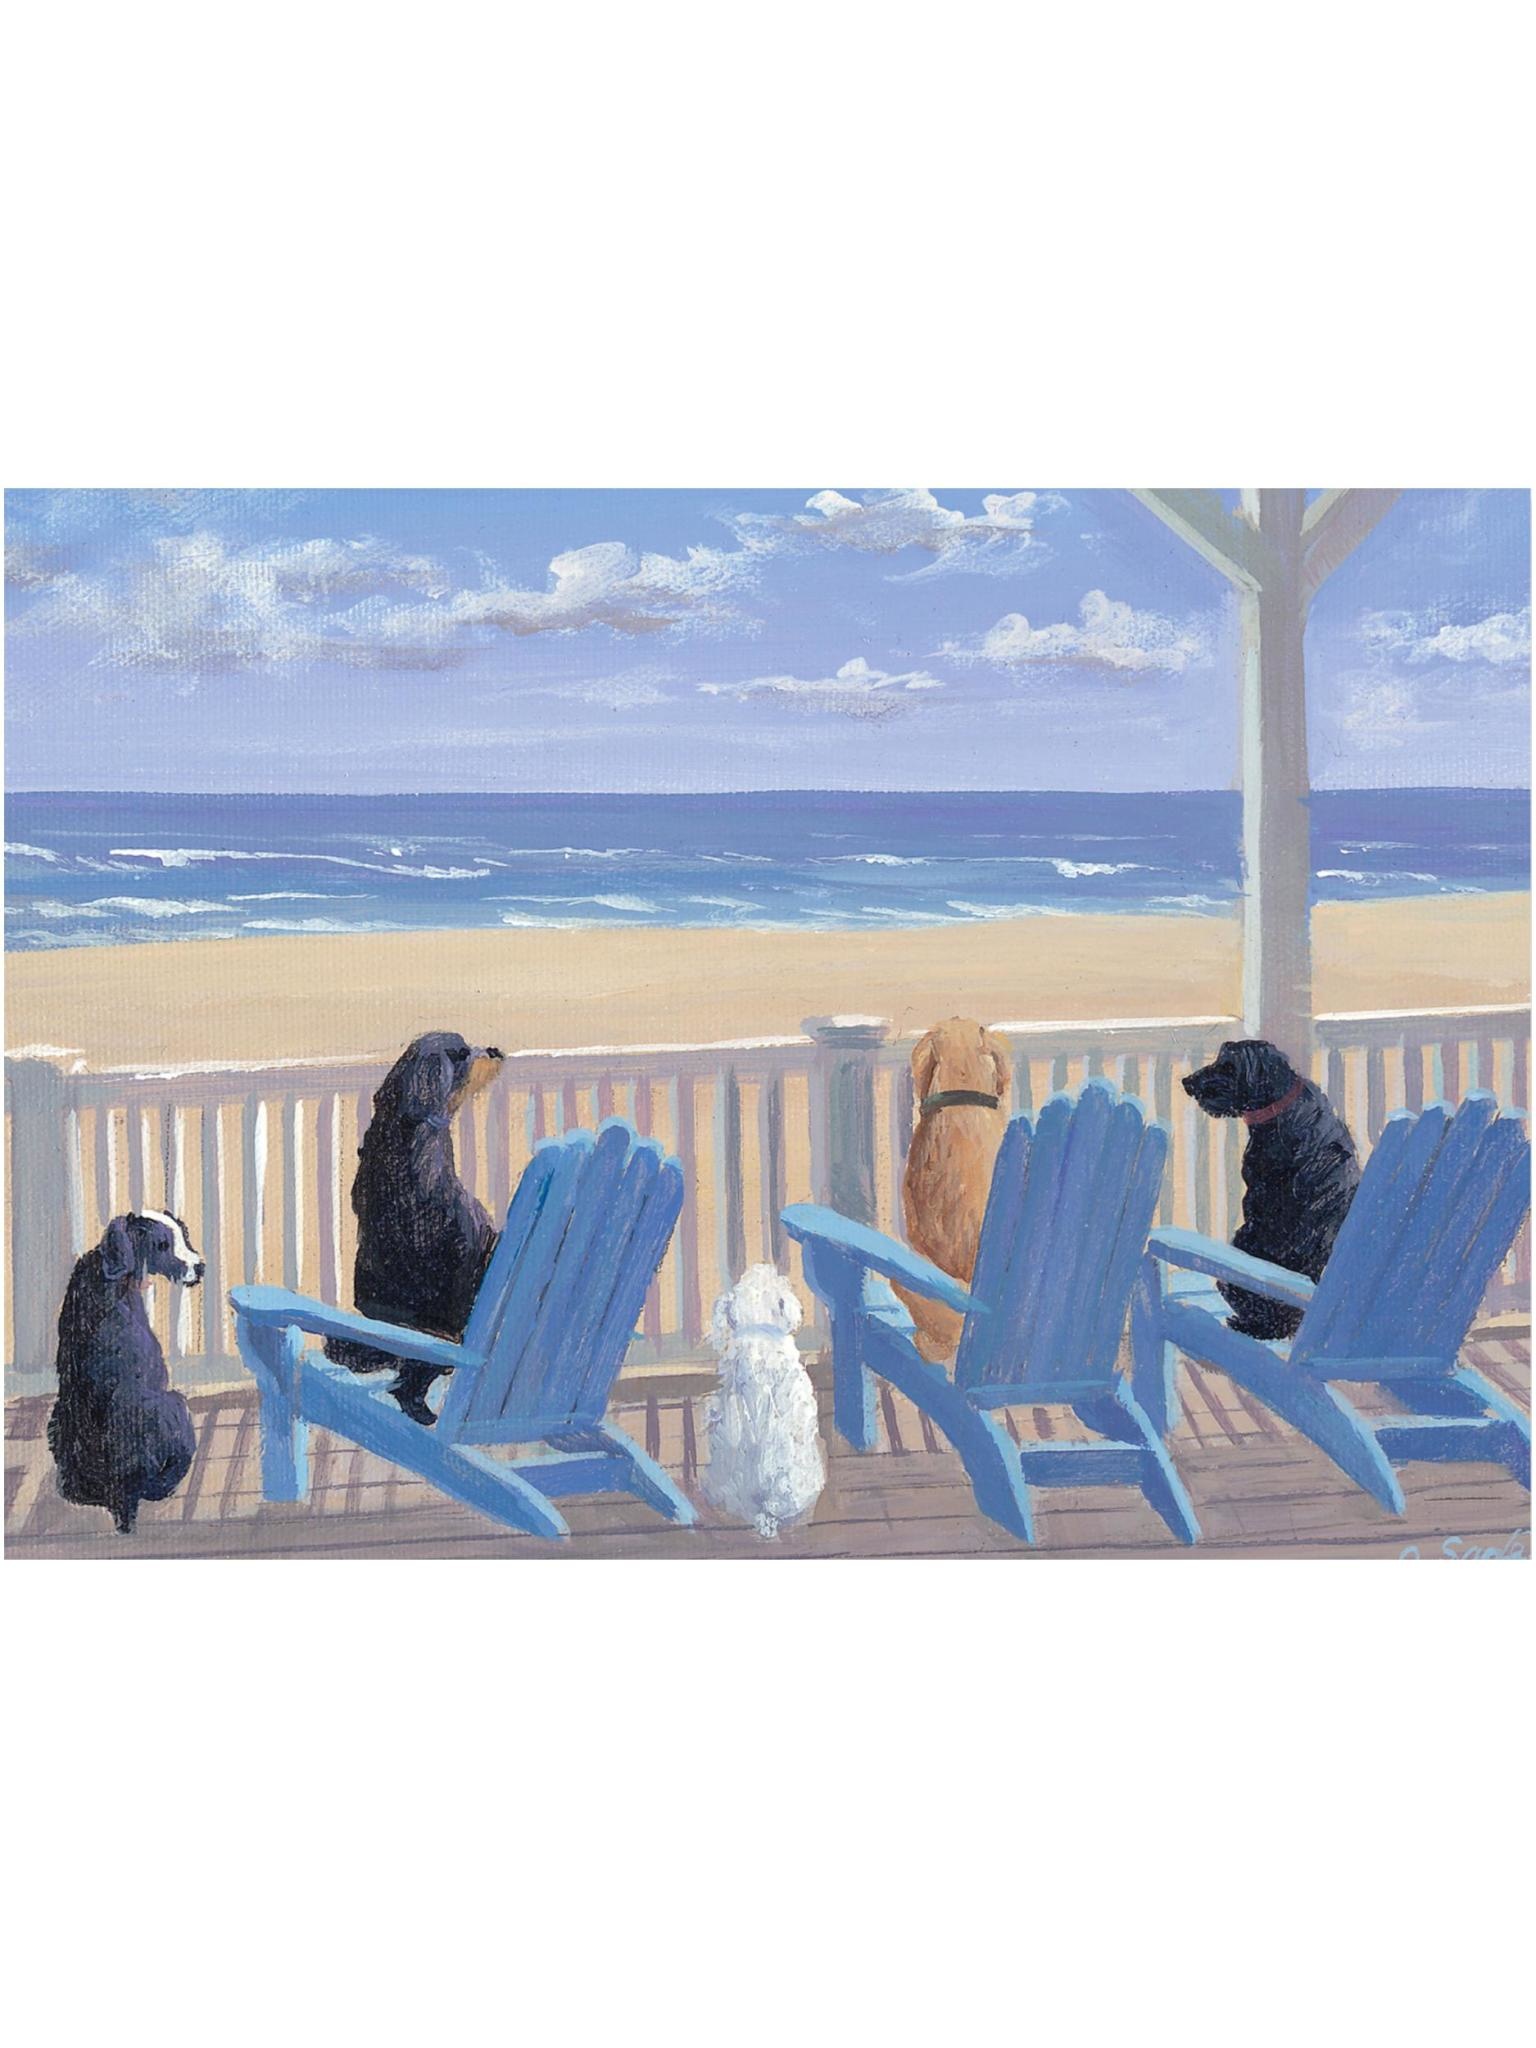 Peter Pauper Dogs in Deck Chairs Note Cards